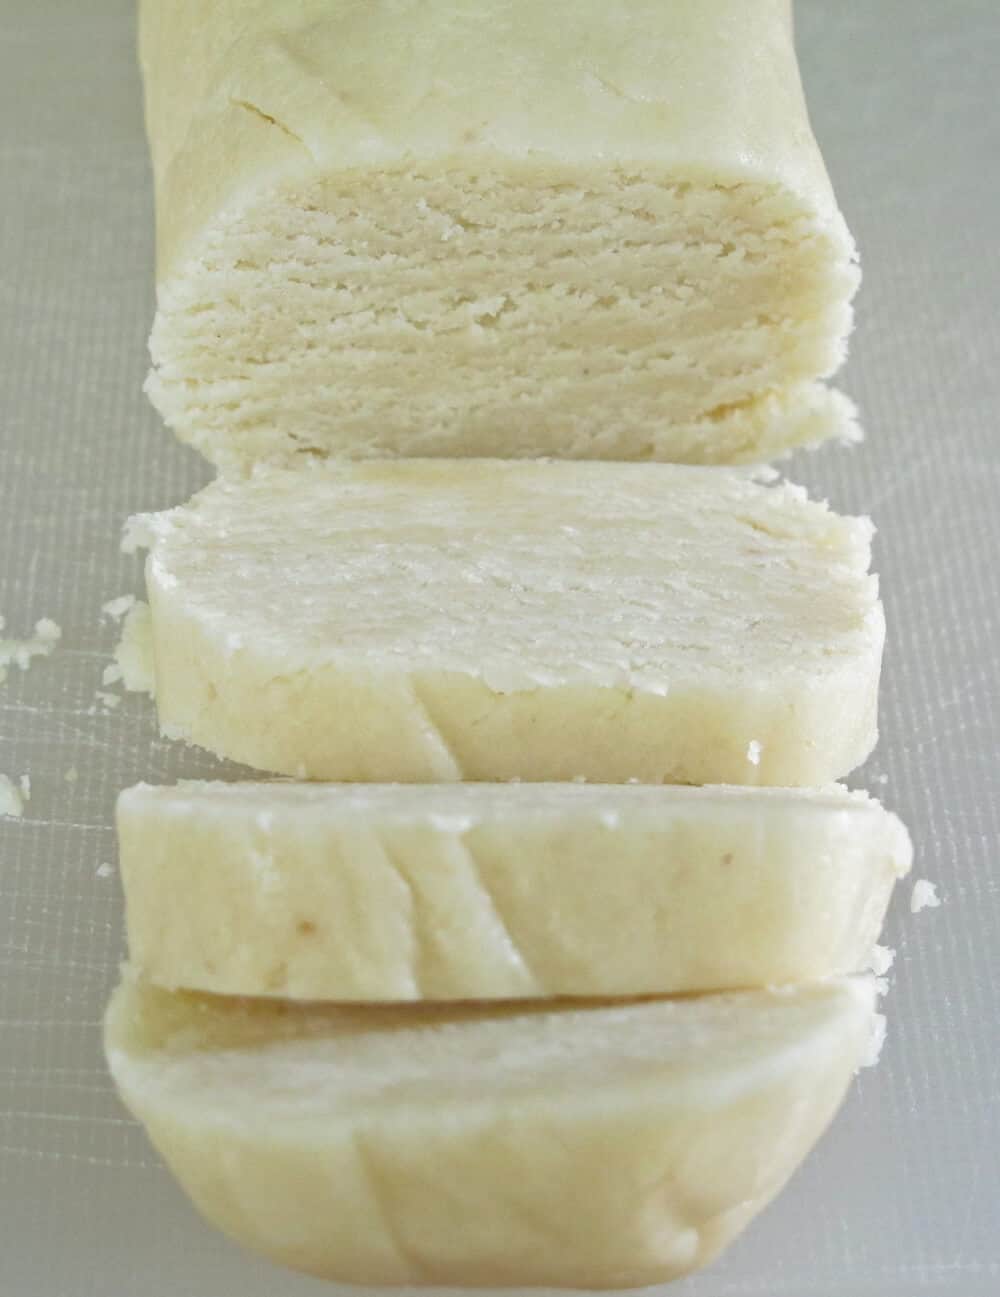 Homemade marzipan is delicious and easy to make. Much less expensive than store-bought too. 